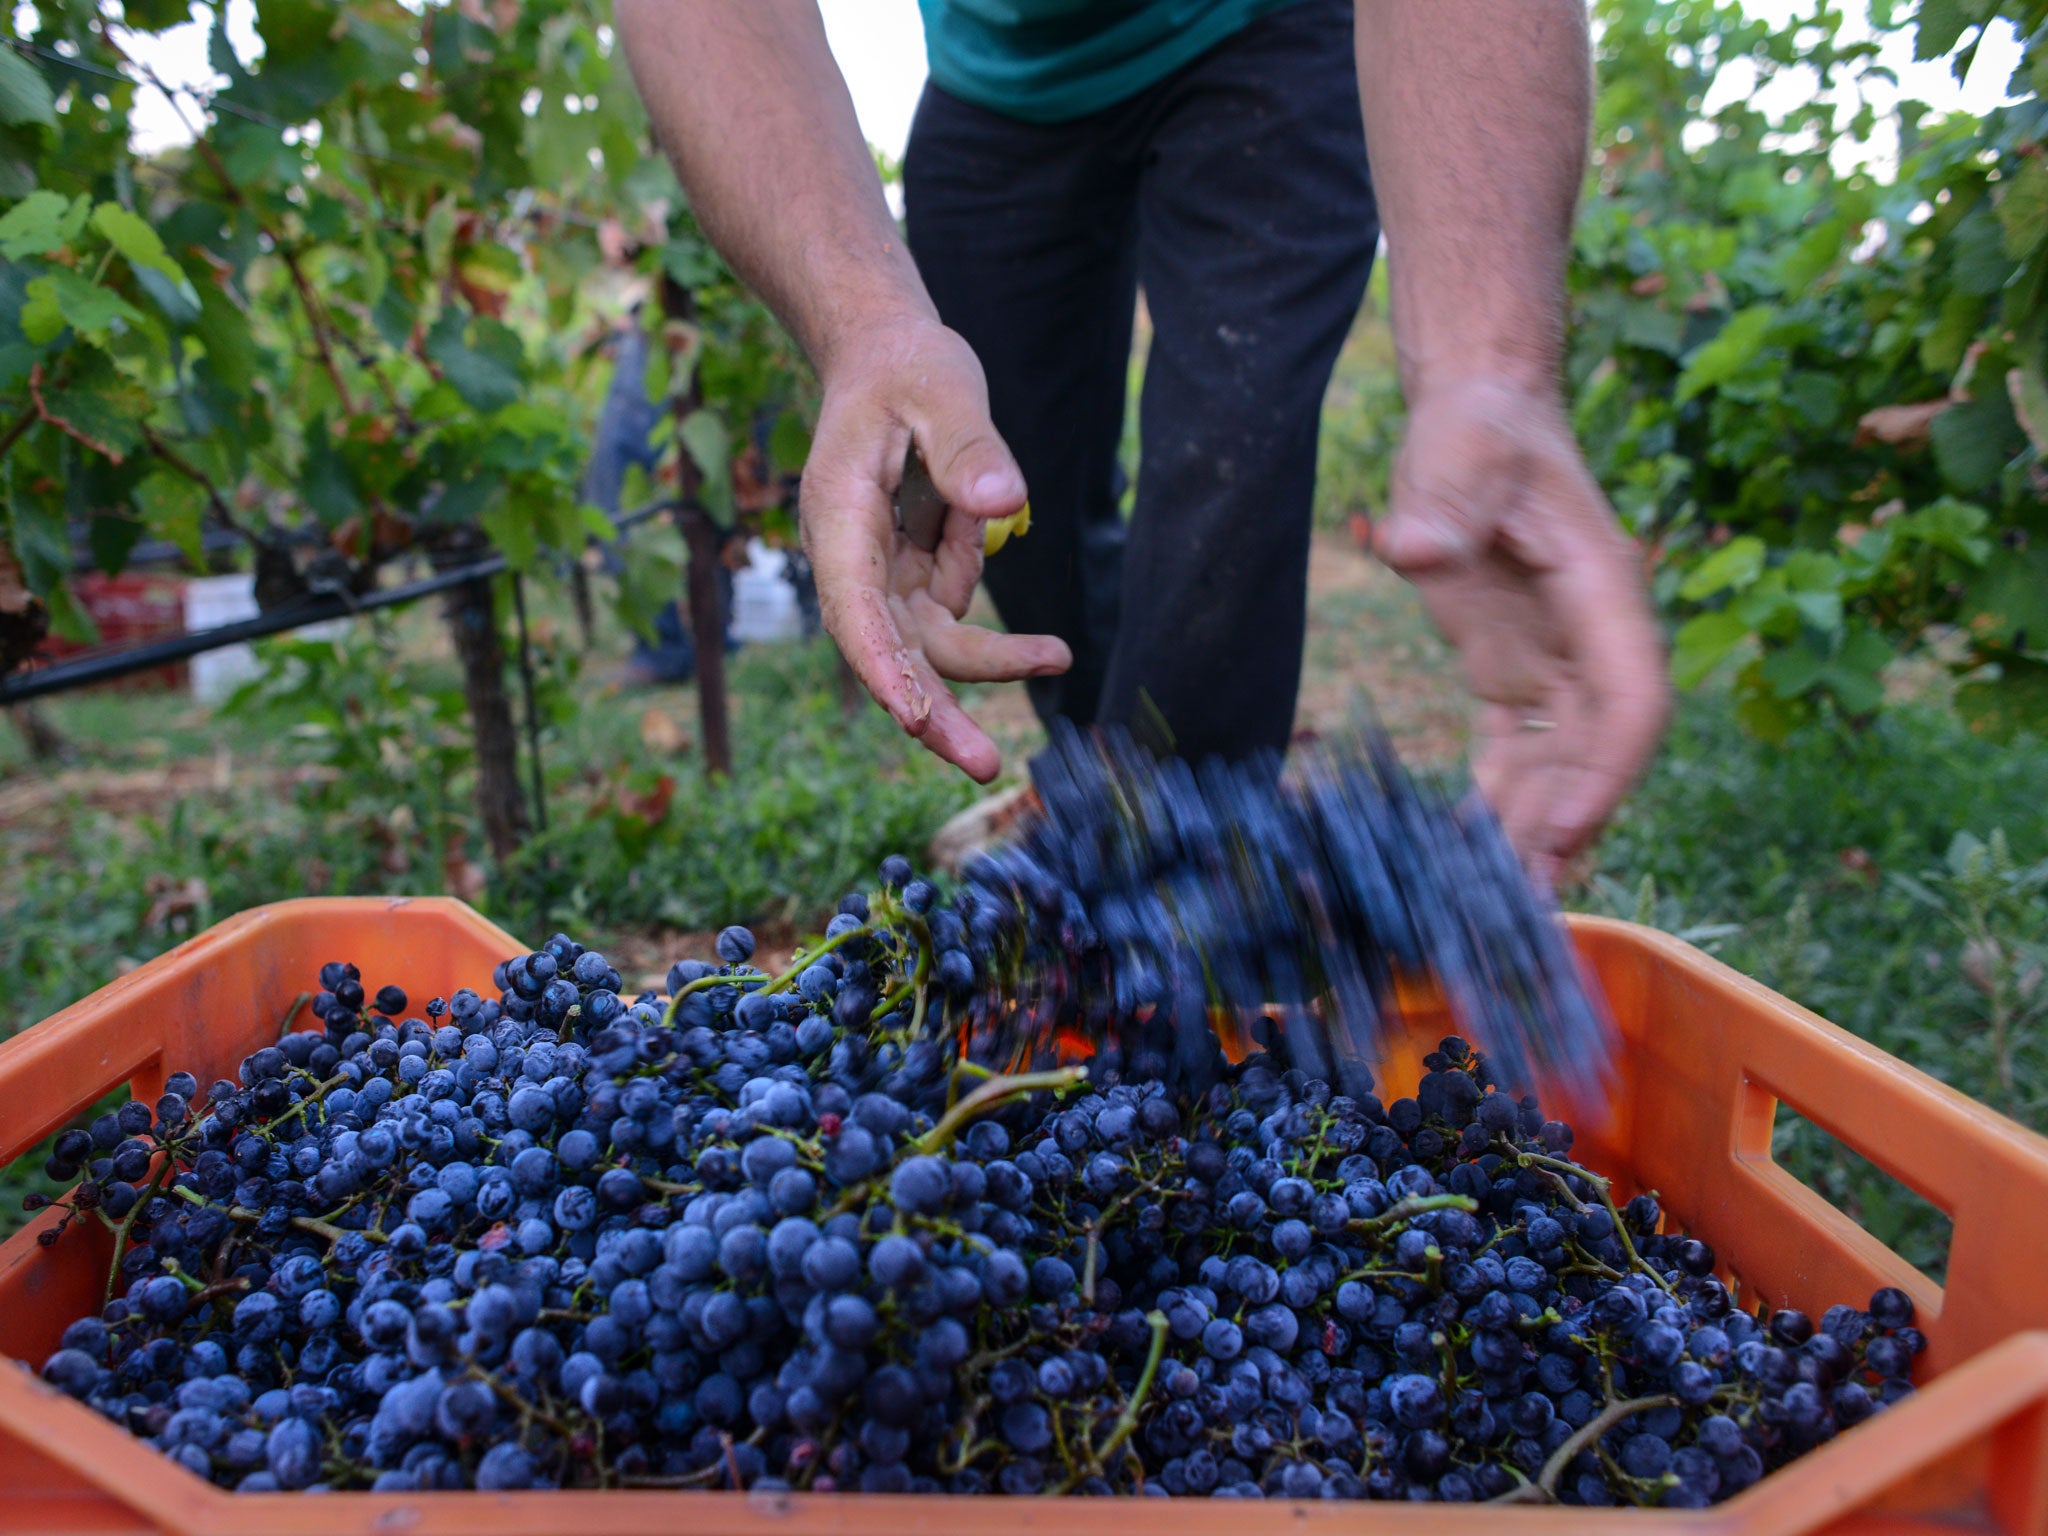 Cream of the crop: A grape harvest in Athens